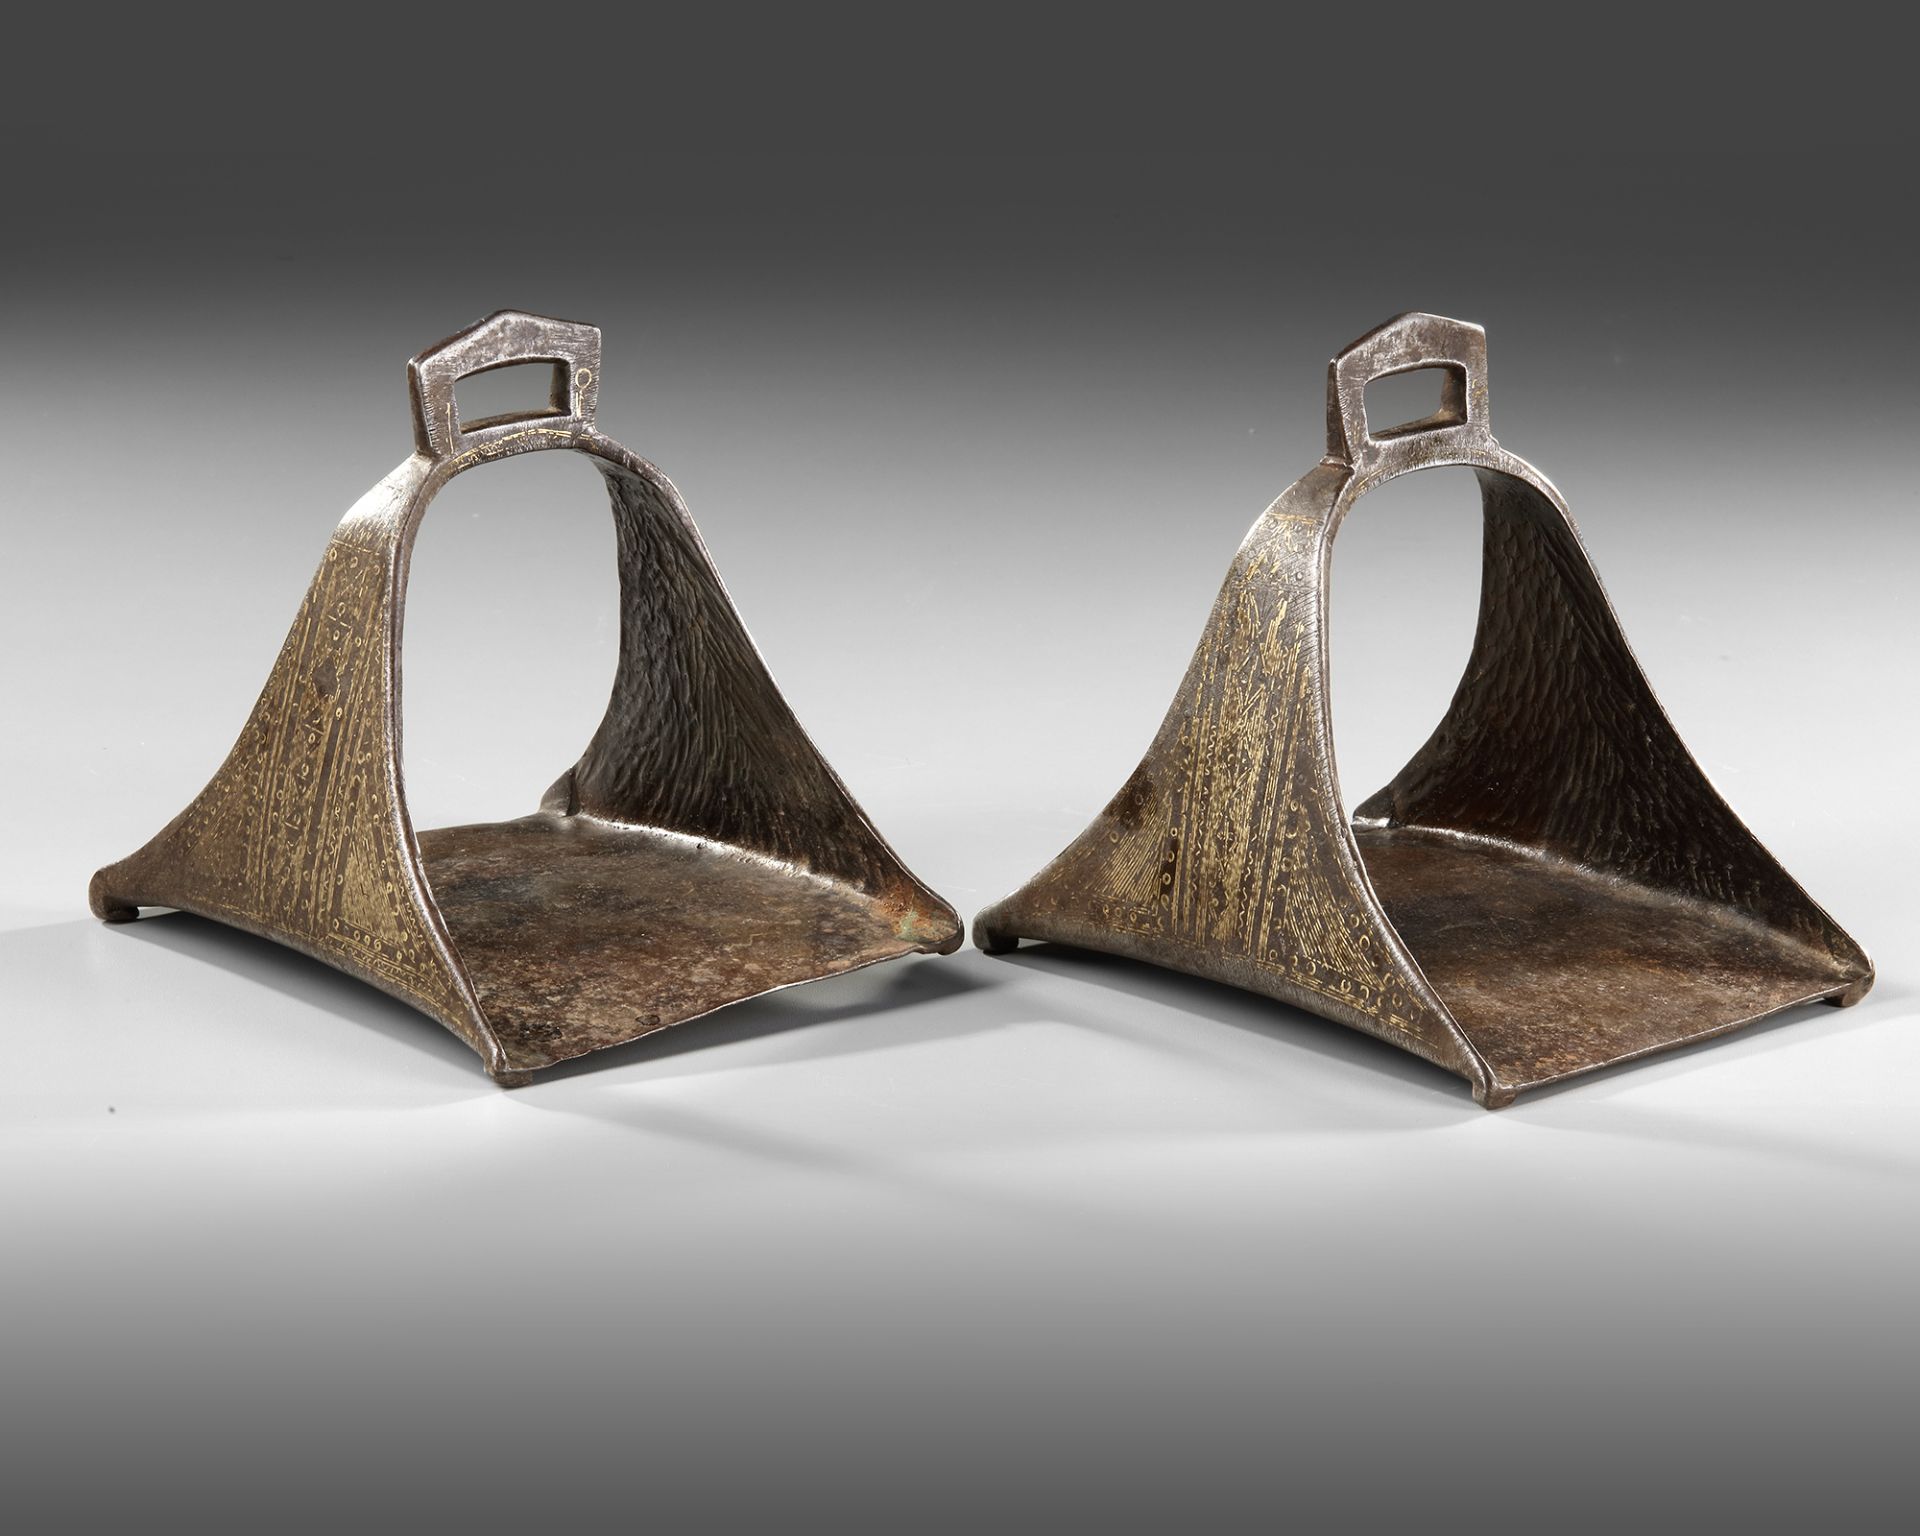 A PAIR OF STEEL STIRRUPS, NORTH AFRICA, 19TH CENTURY - Image 2 of 3